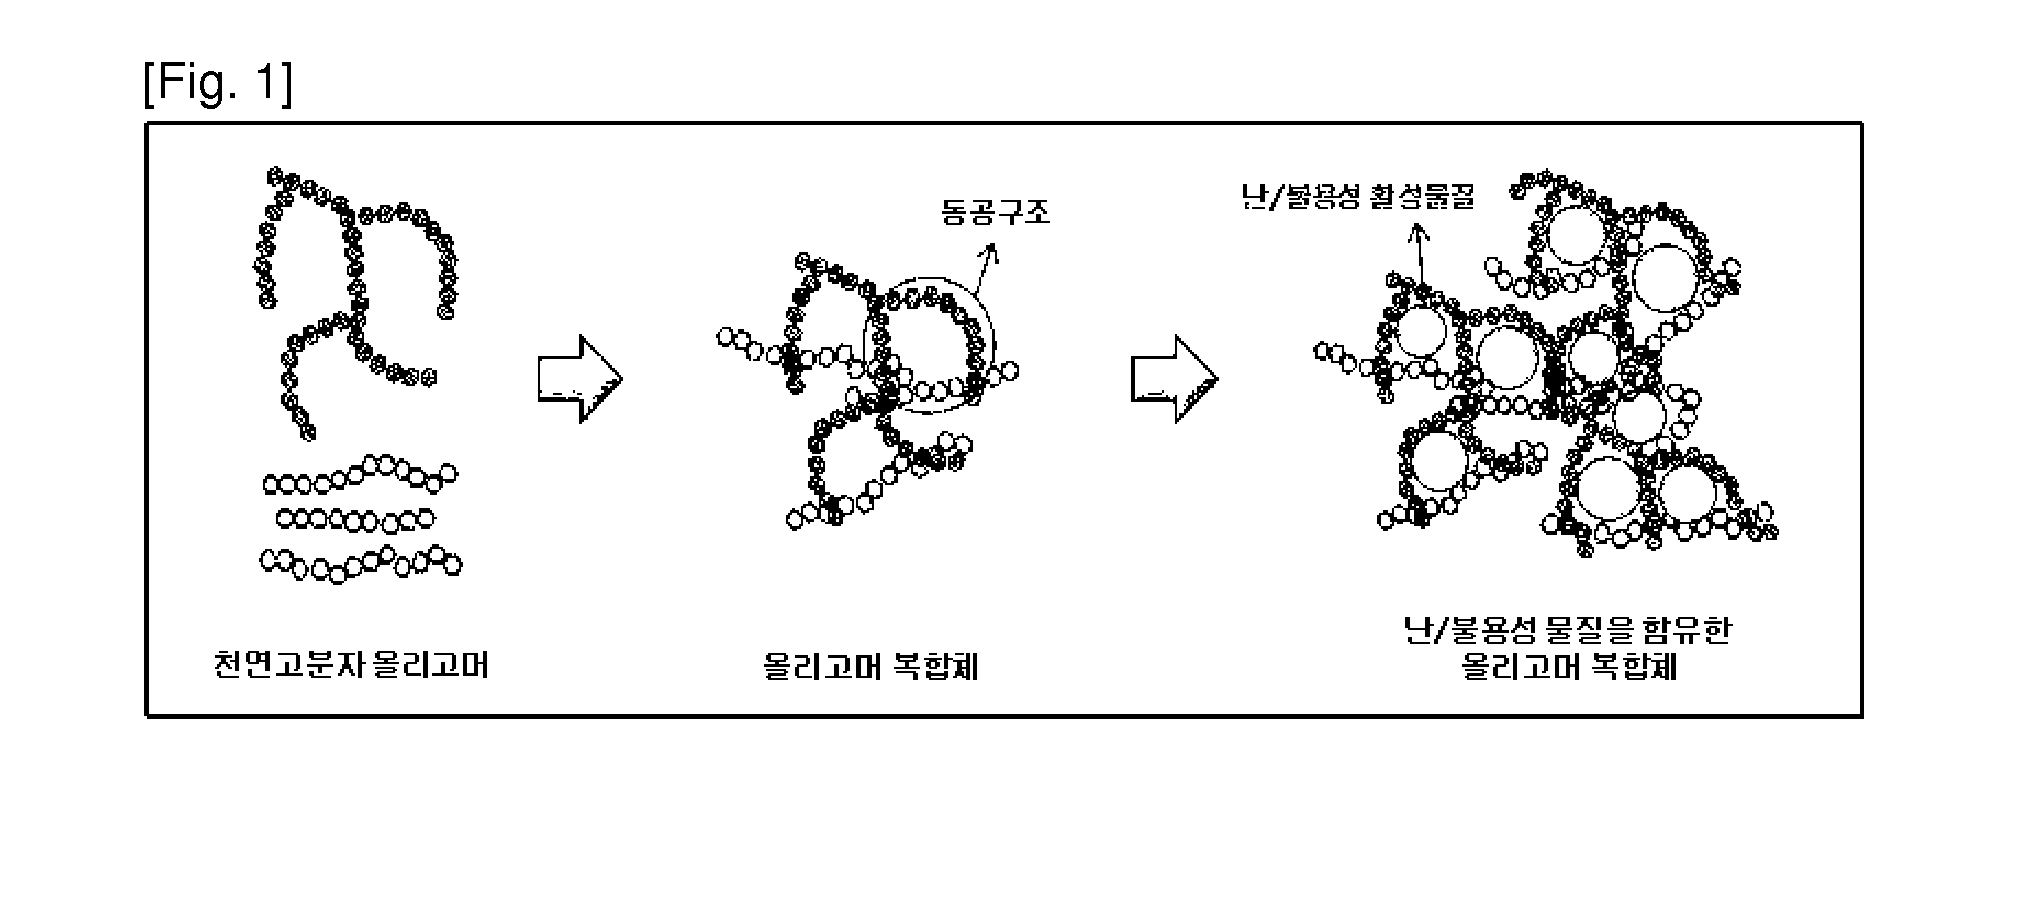 Method of solubilizing poorly soluble/insoluble active material through formation of oligomer composite